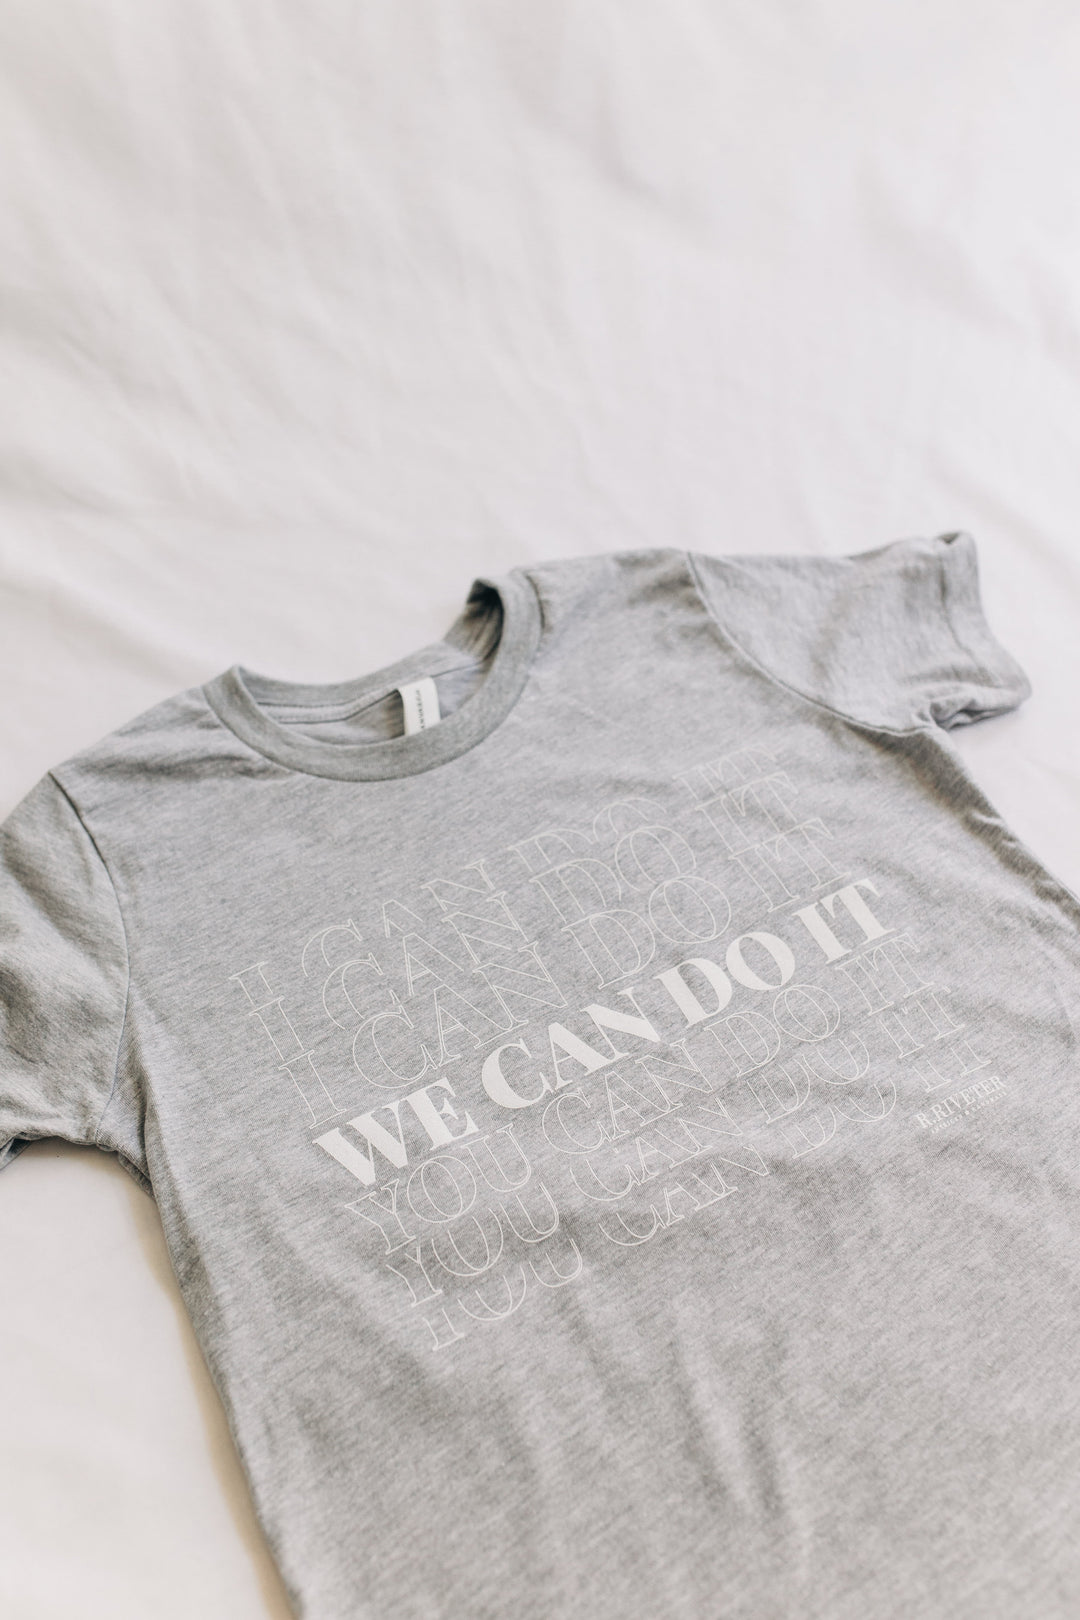 Youth Tee | We Can Do It! Grey